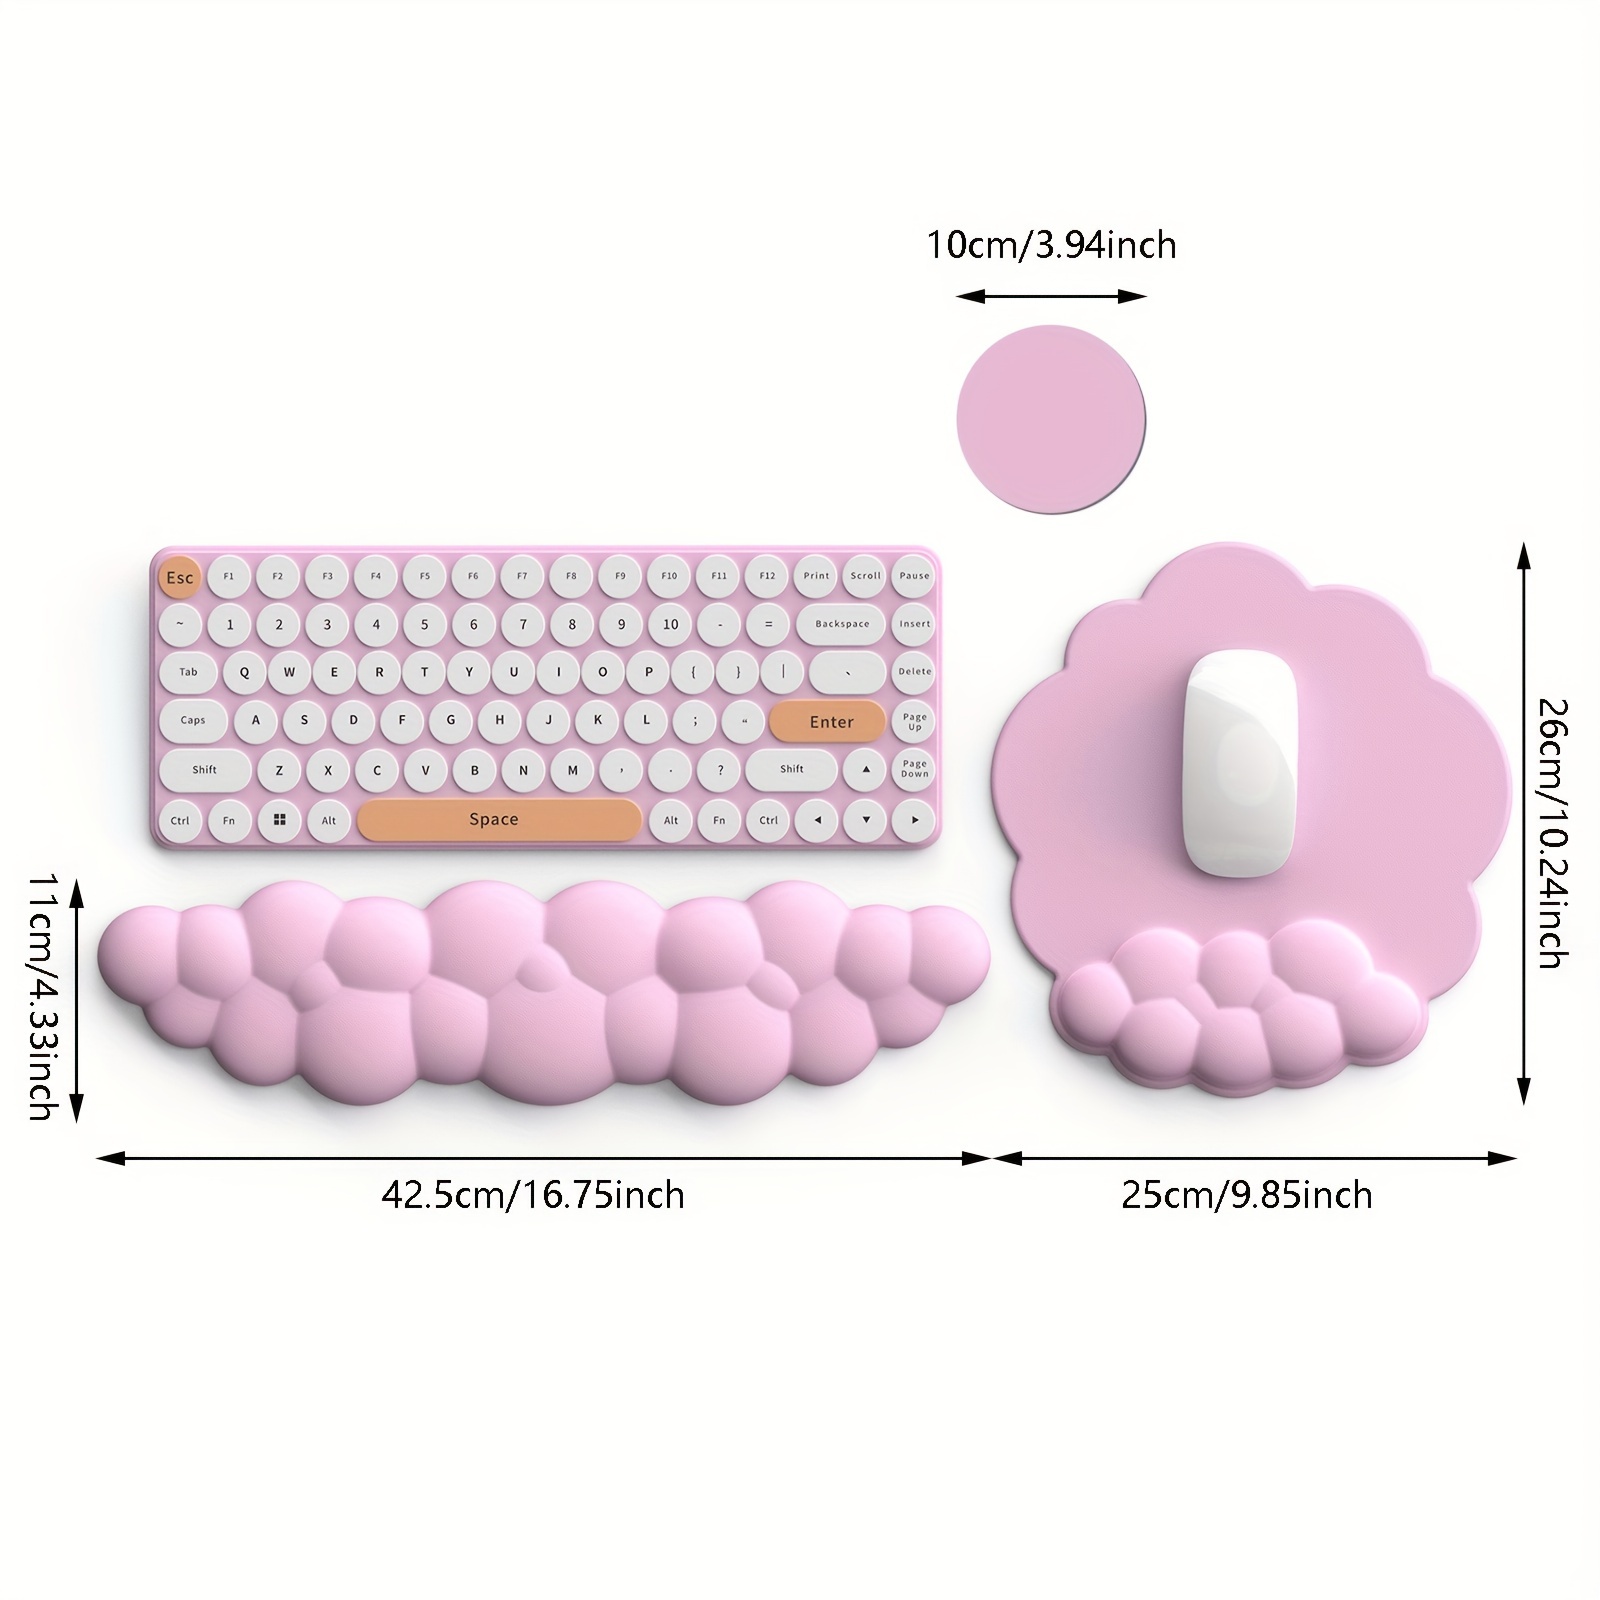     ergonomic mouse pad with memory foam wrist rest perfect for computer laptop gaming home office 2